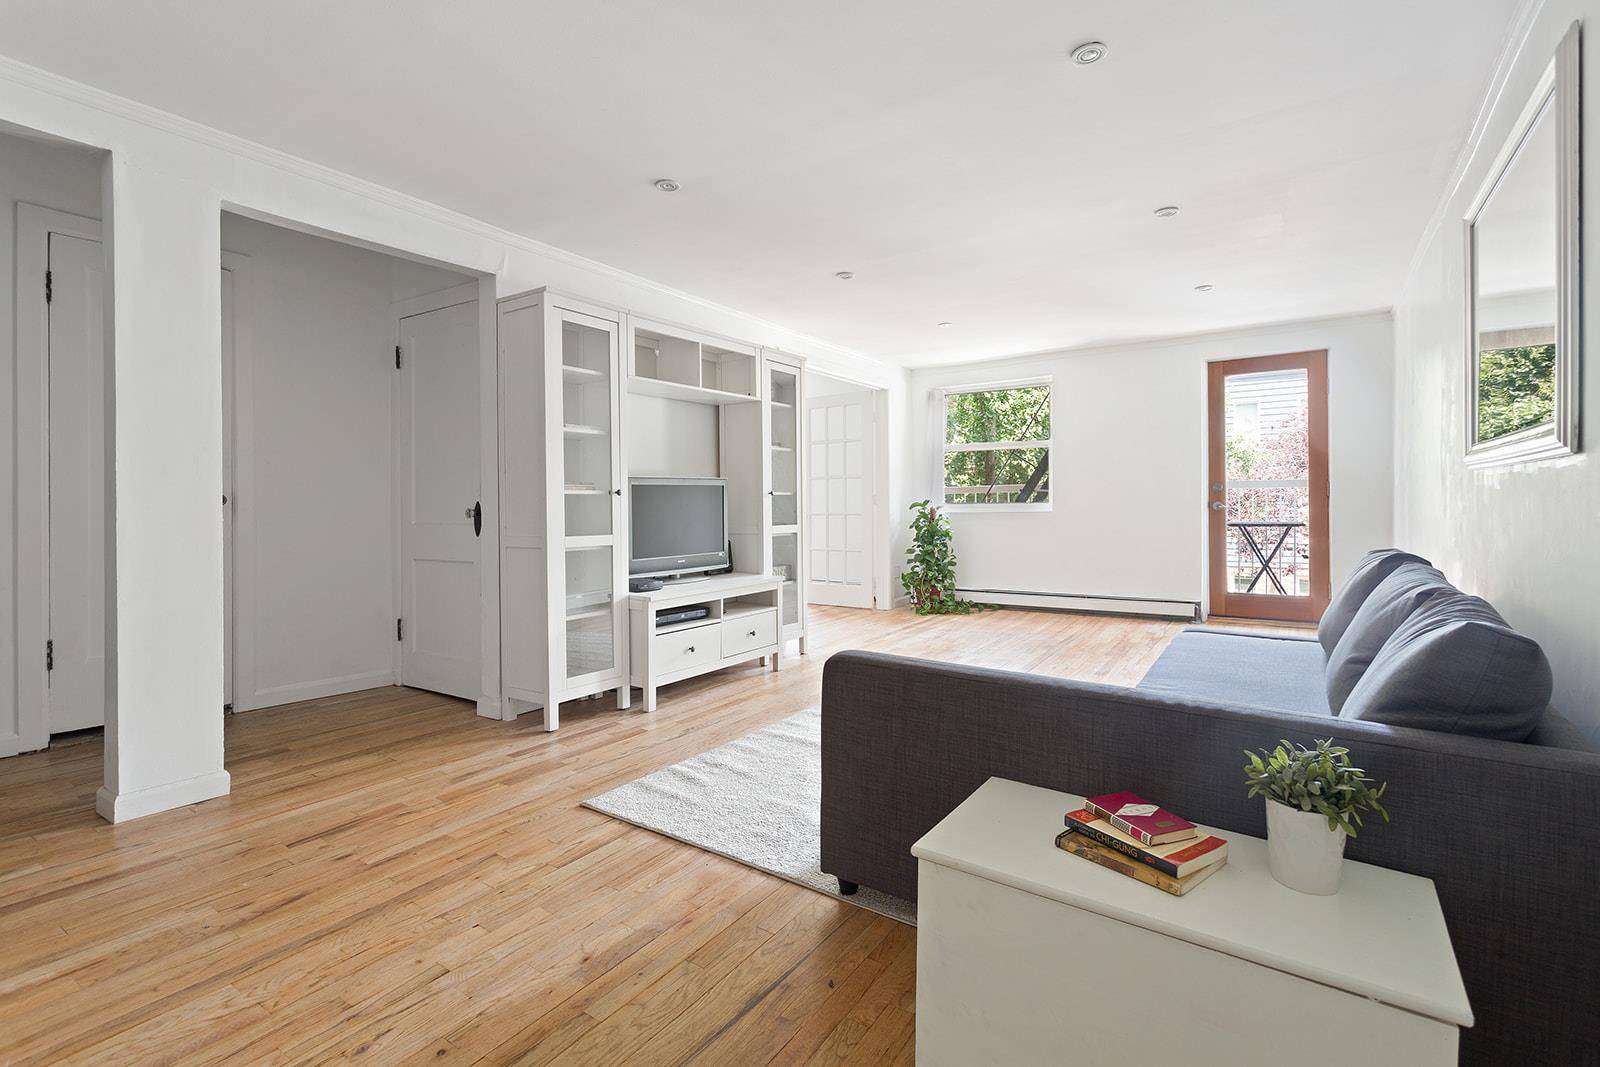 Get your very own piece of Brooklyn sunshine with this charming one and a half bedroom, convertible two in the Prospect Park adjacent neighborhood of Greenwood South Slope.